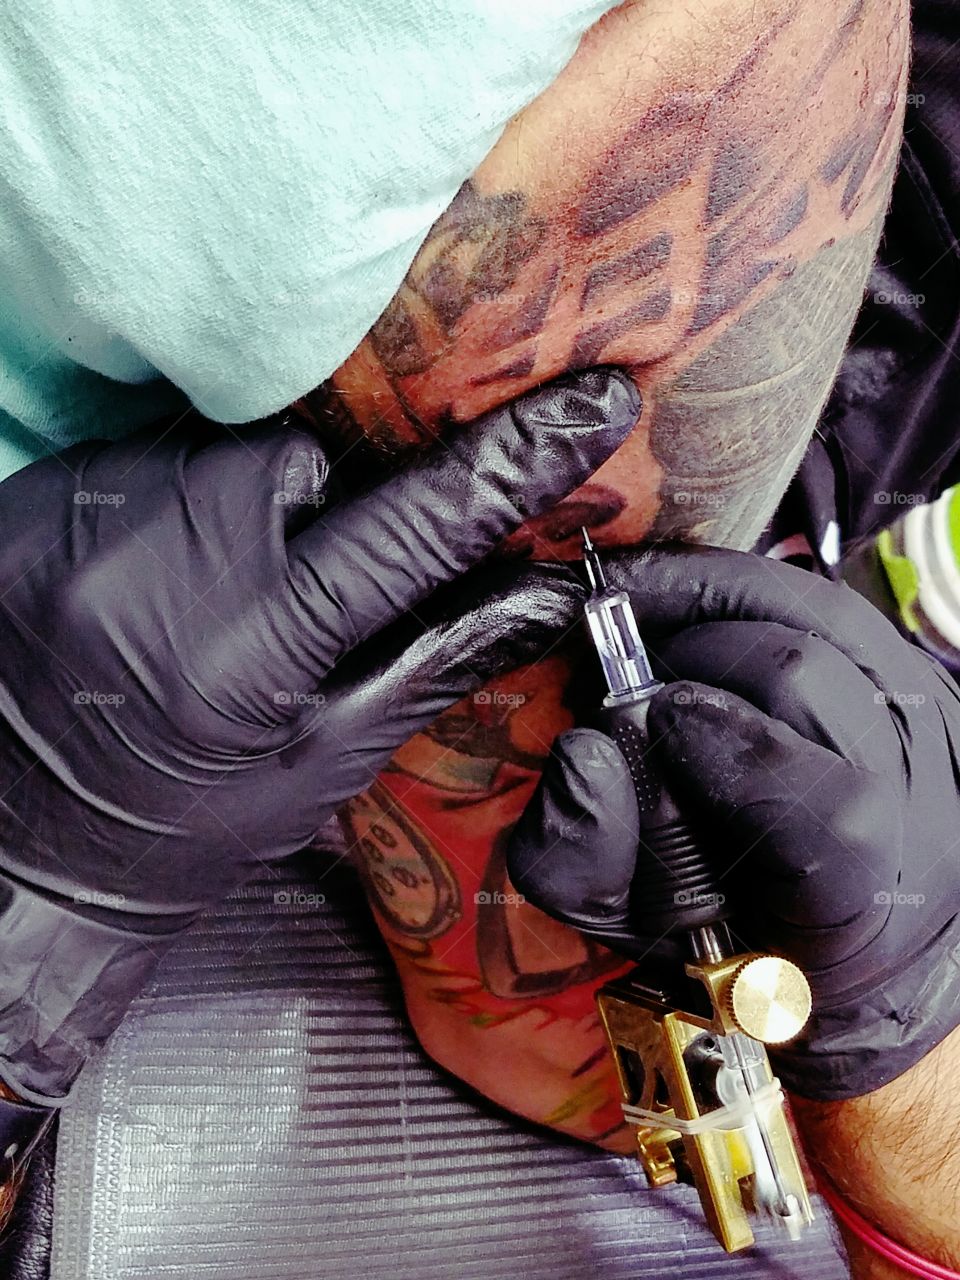 My best friend getting his tattoo sleeve finished.